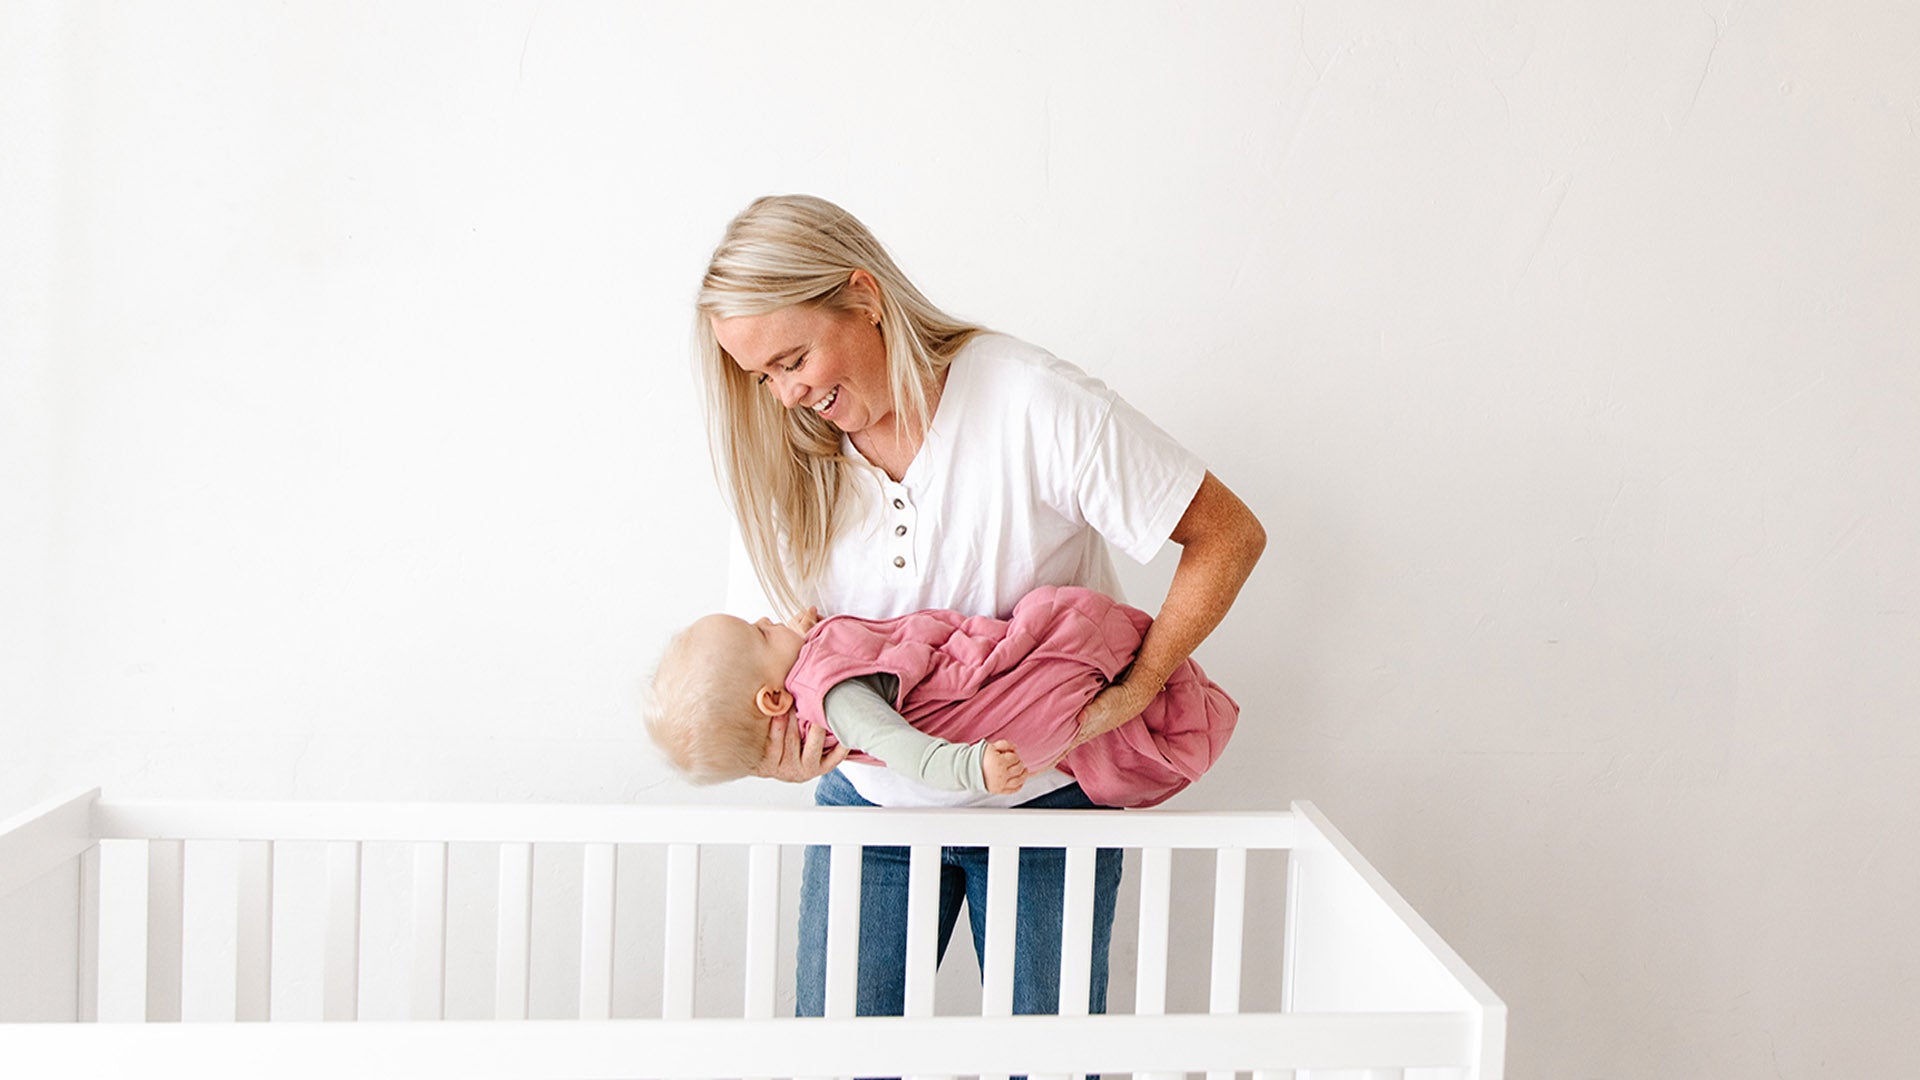 Newborn Sleep Patterns and Schedules for the First Year